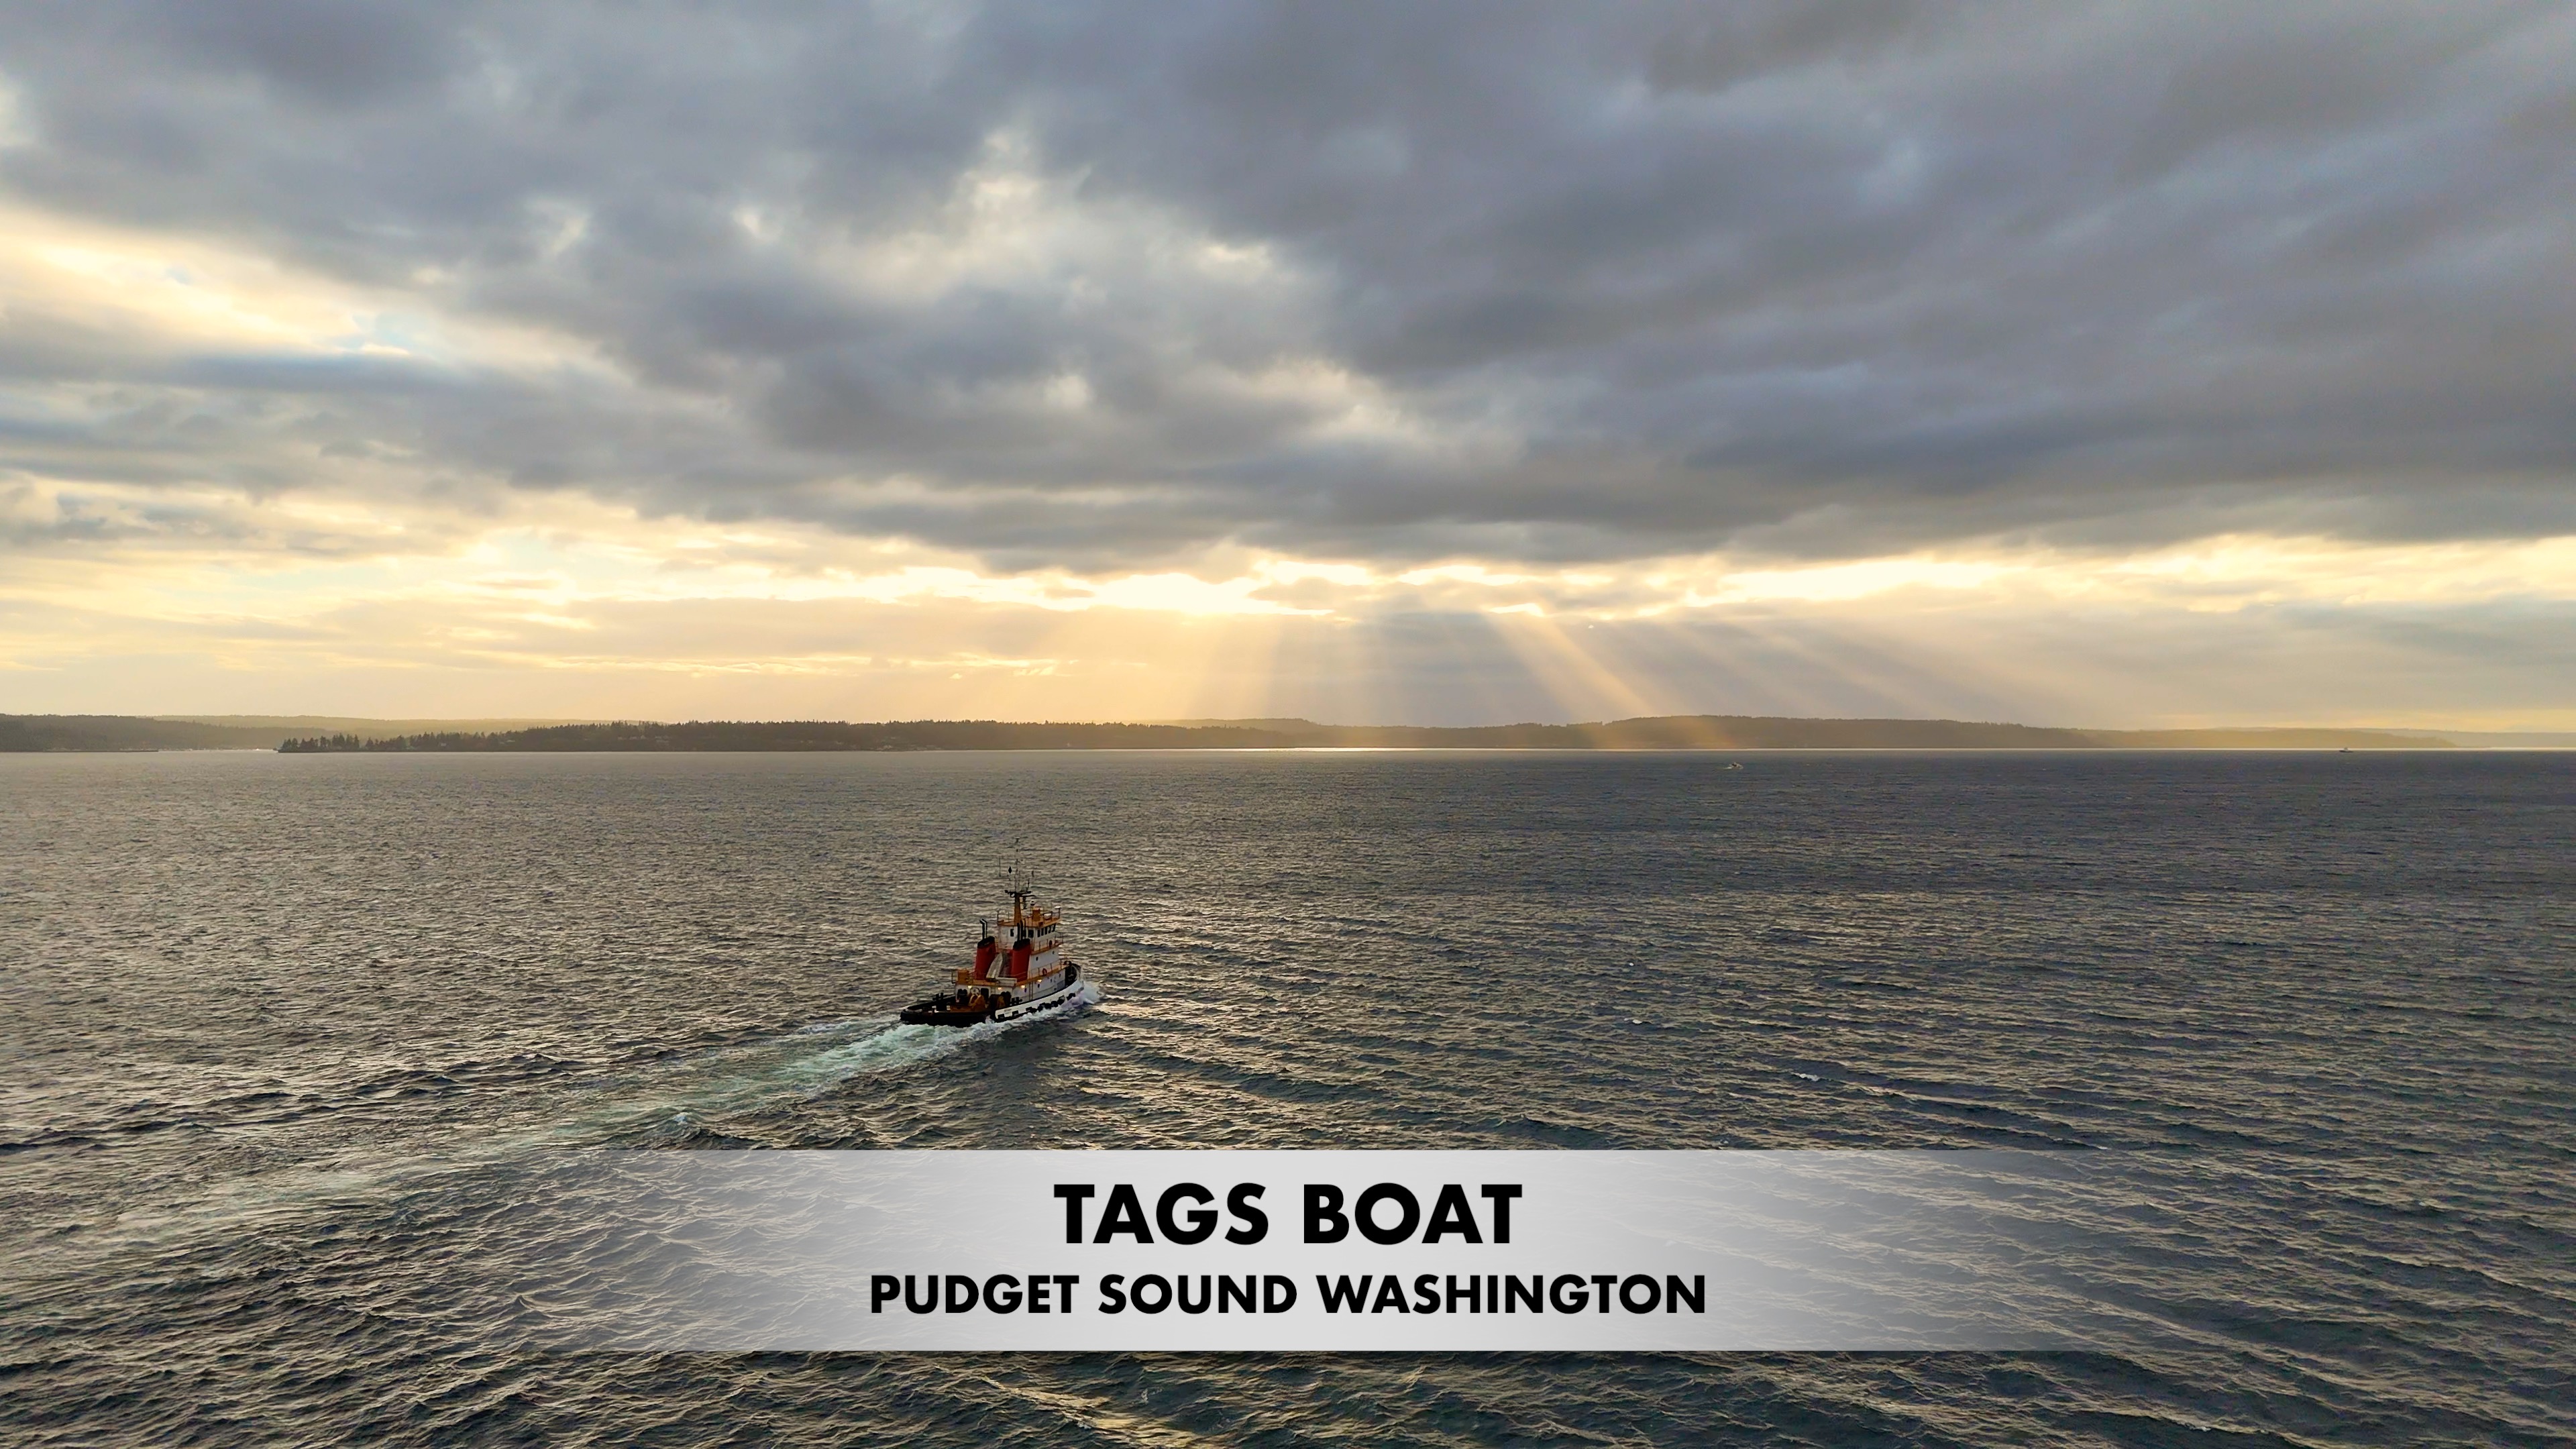 Voyage Through Puget Sound: Boat and Barge Heading to Alaska